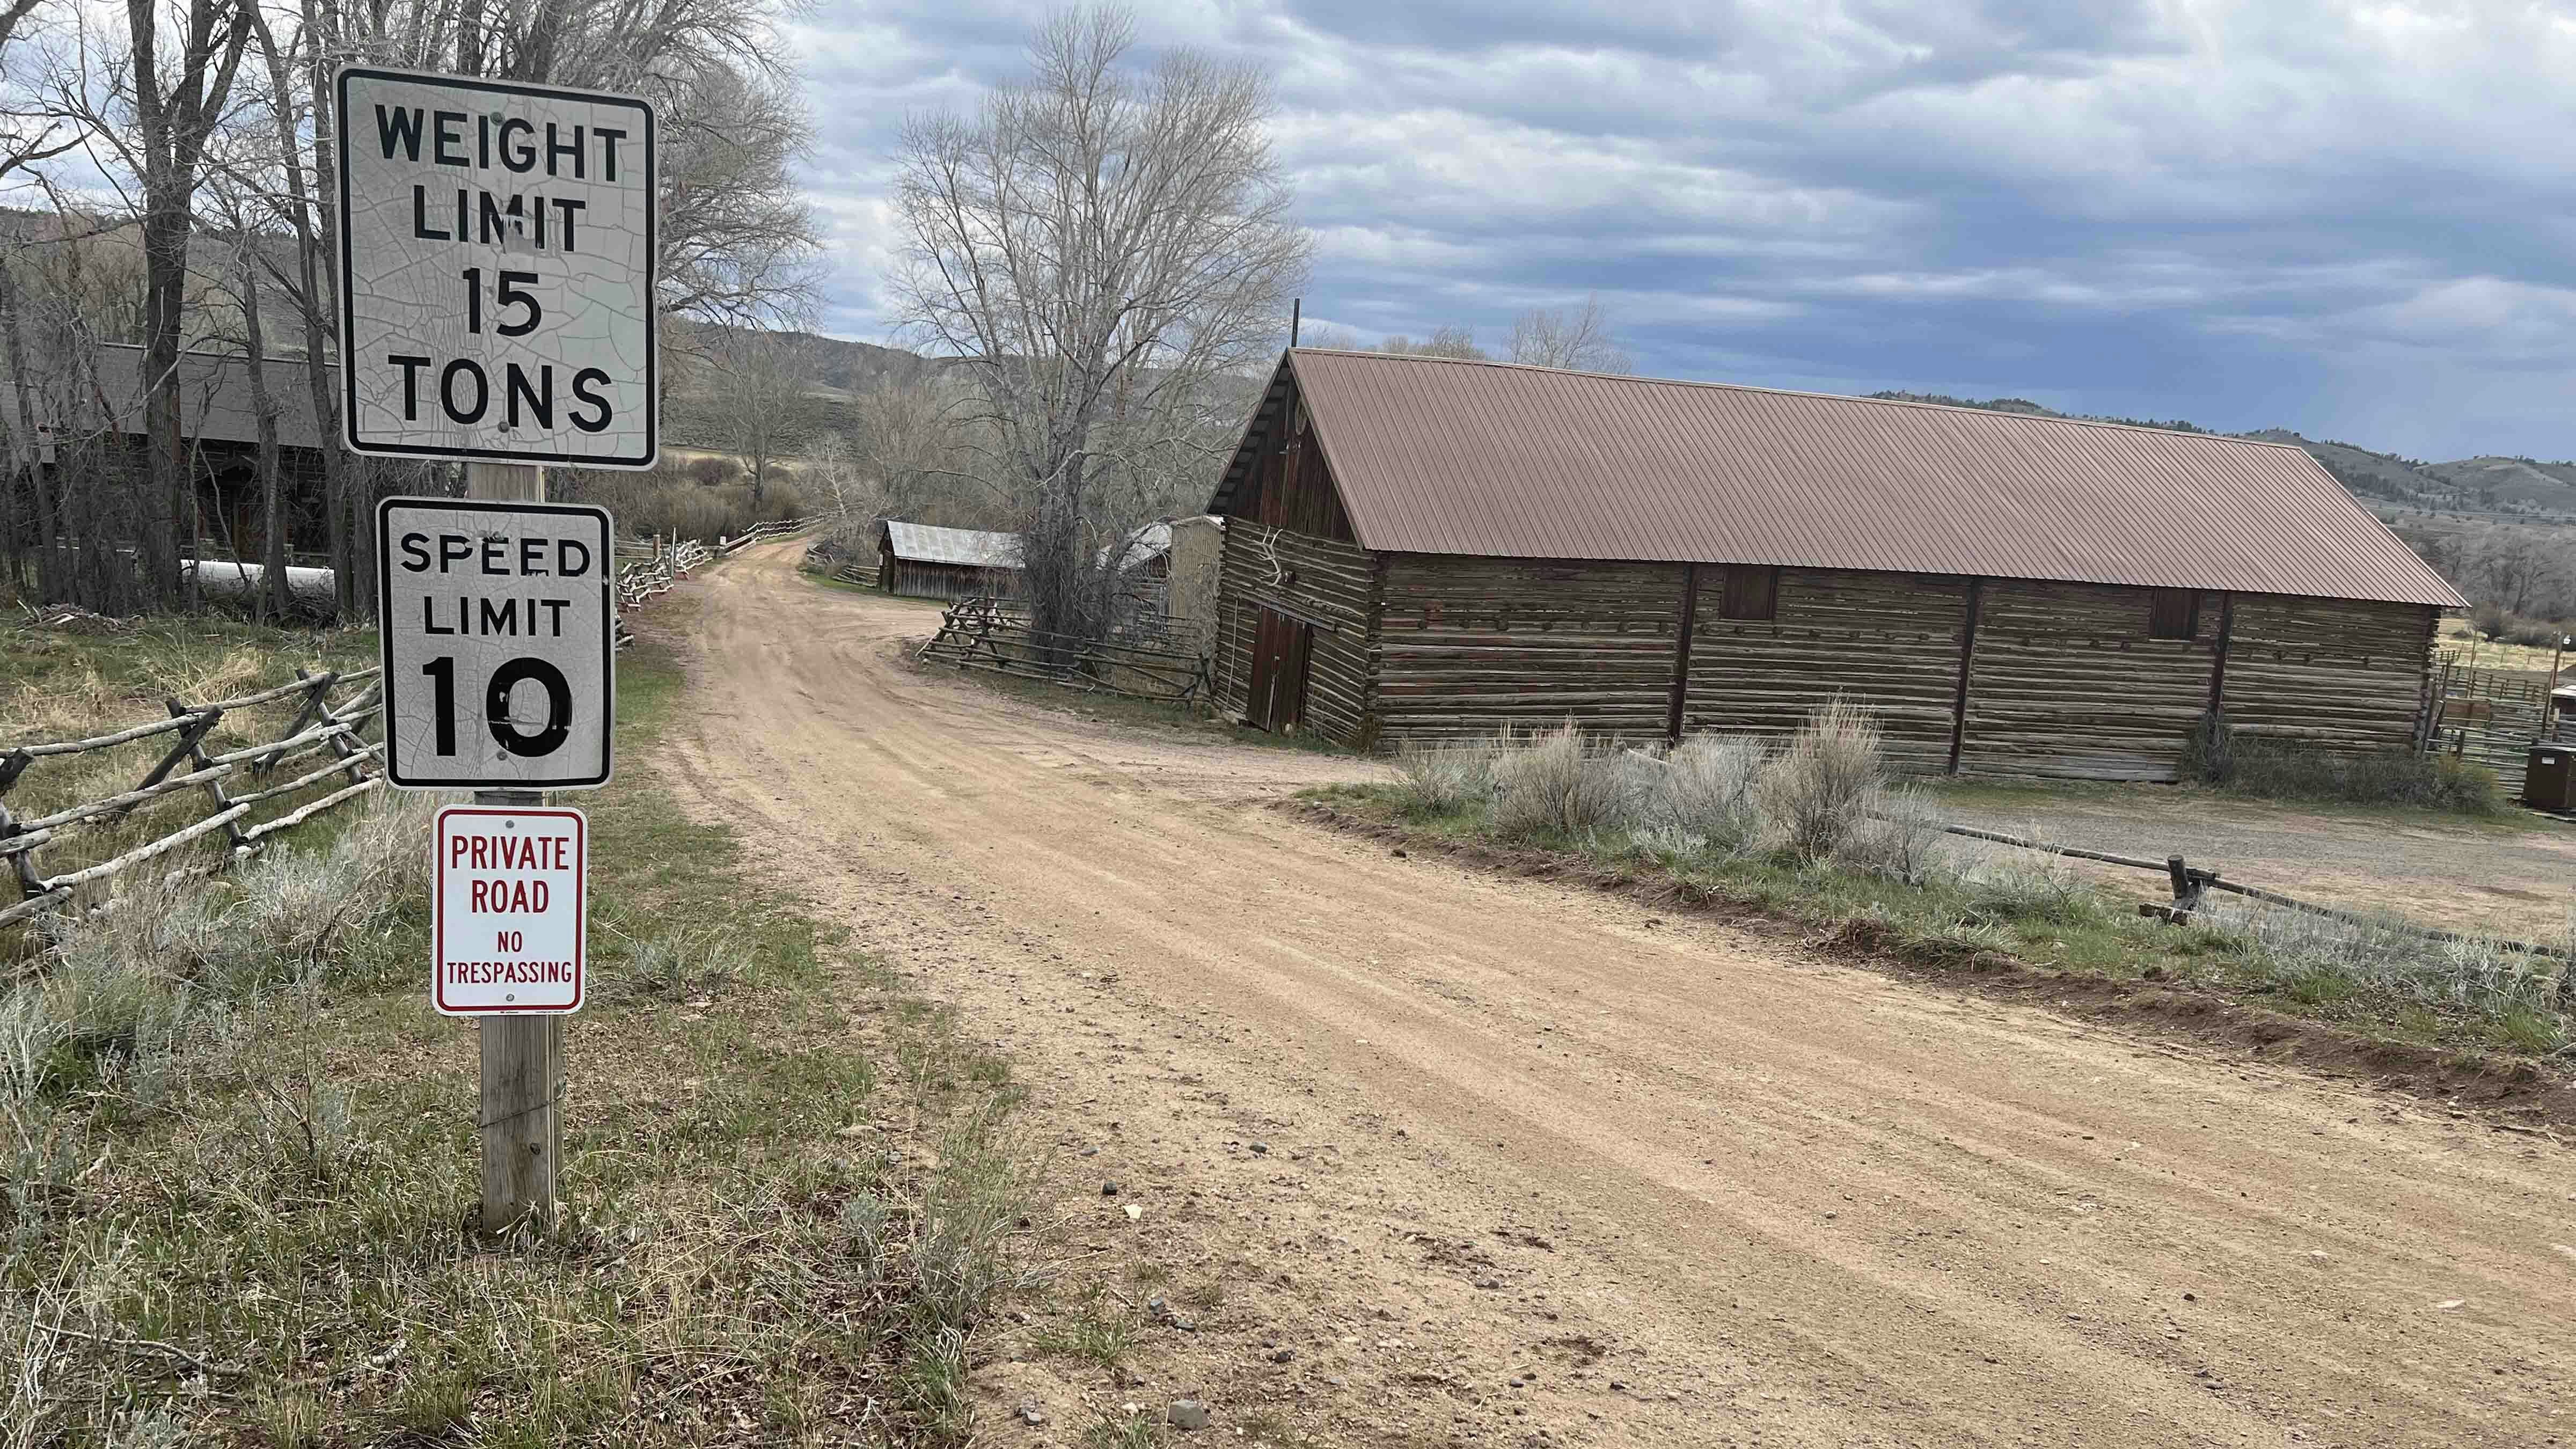 Former Wyoming governor Matt Mead recently opted to close a section of the Boswell Road that runs through his property, just off Highway 10 in southern Albany County.